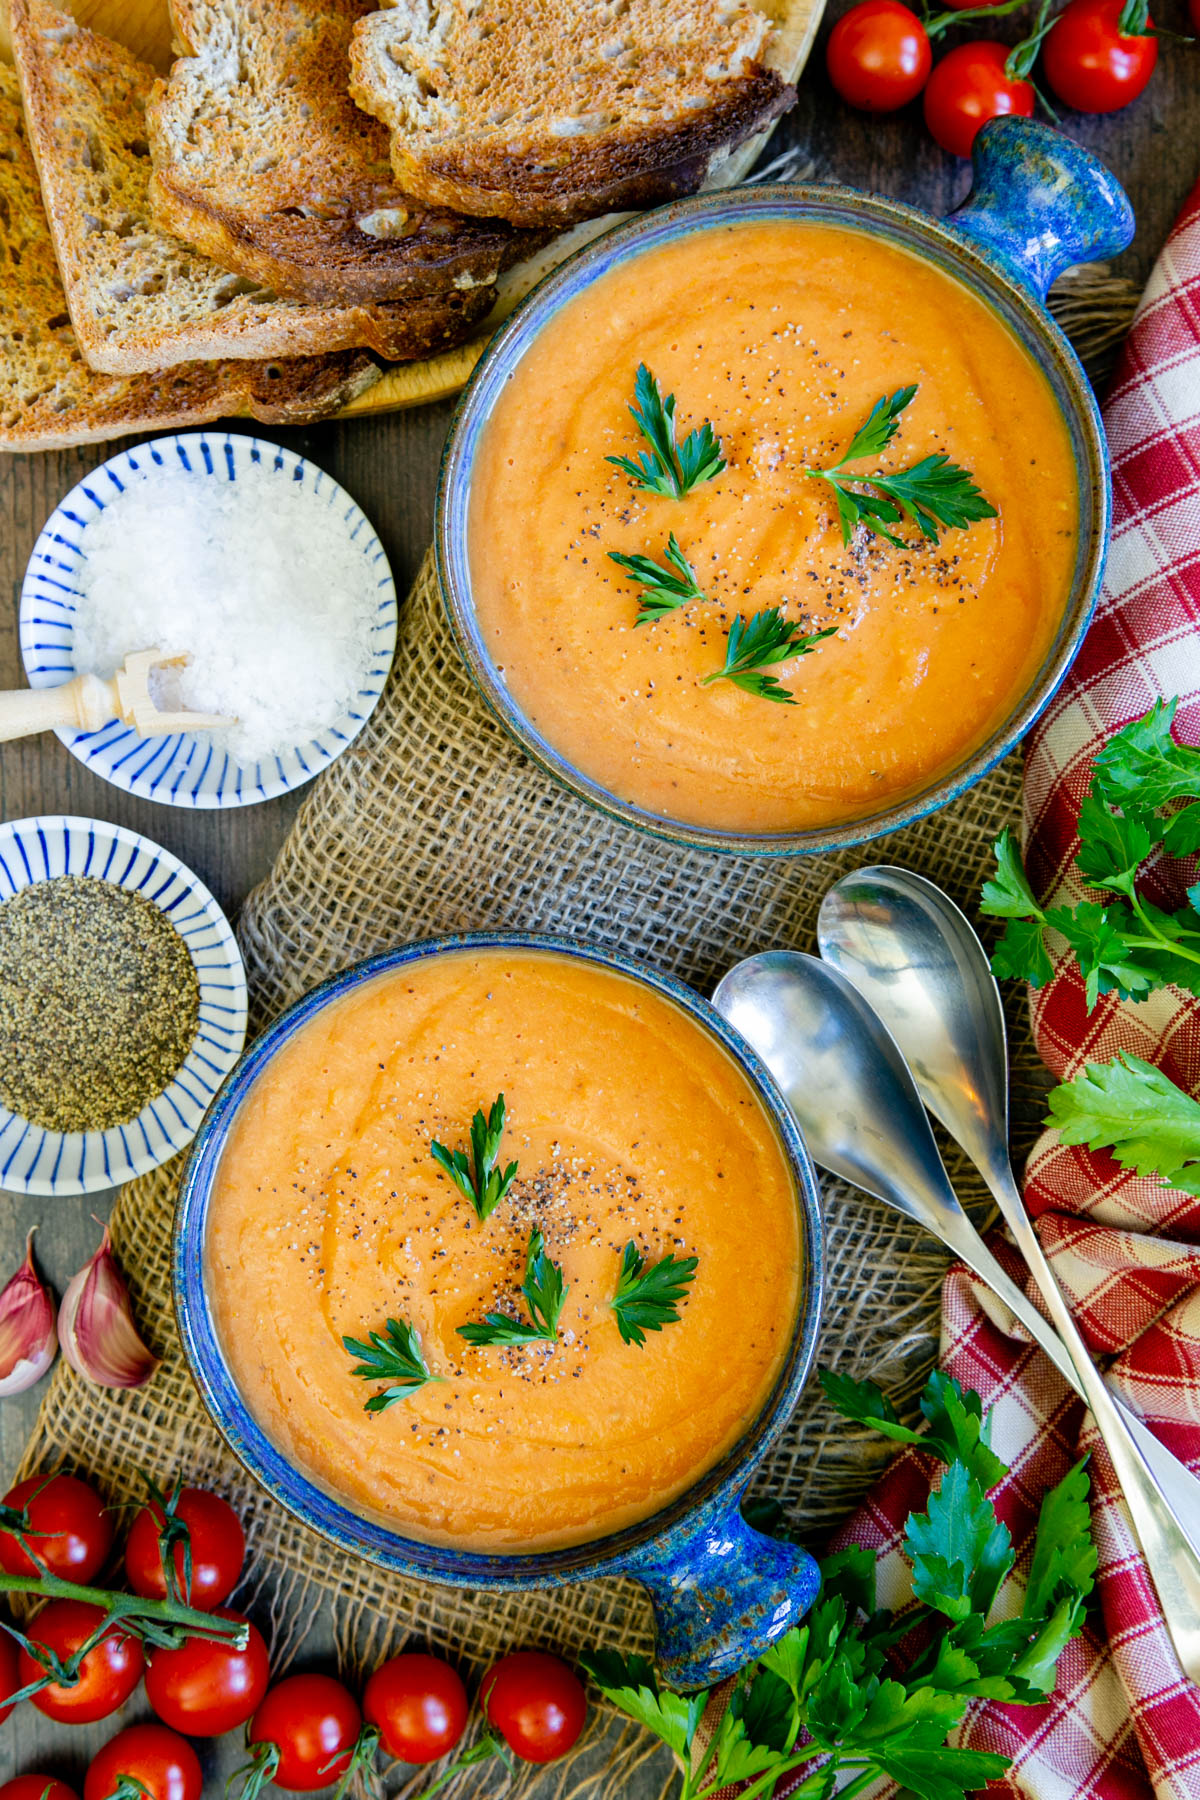 A contrasting garnish of fresh parsley sets off this vibrant Mediterranean soup.